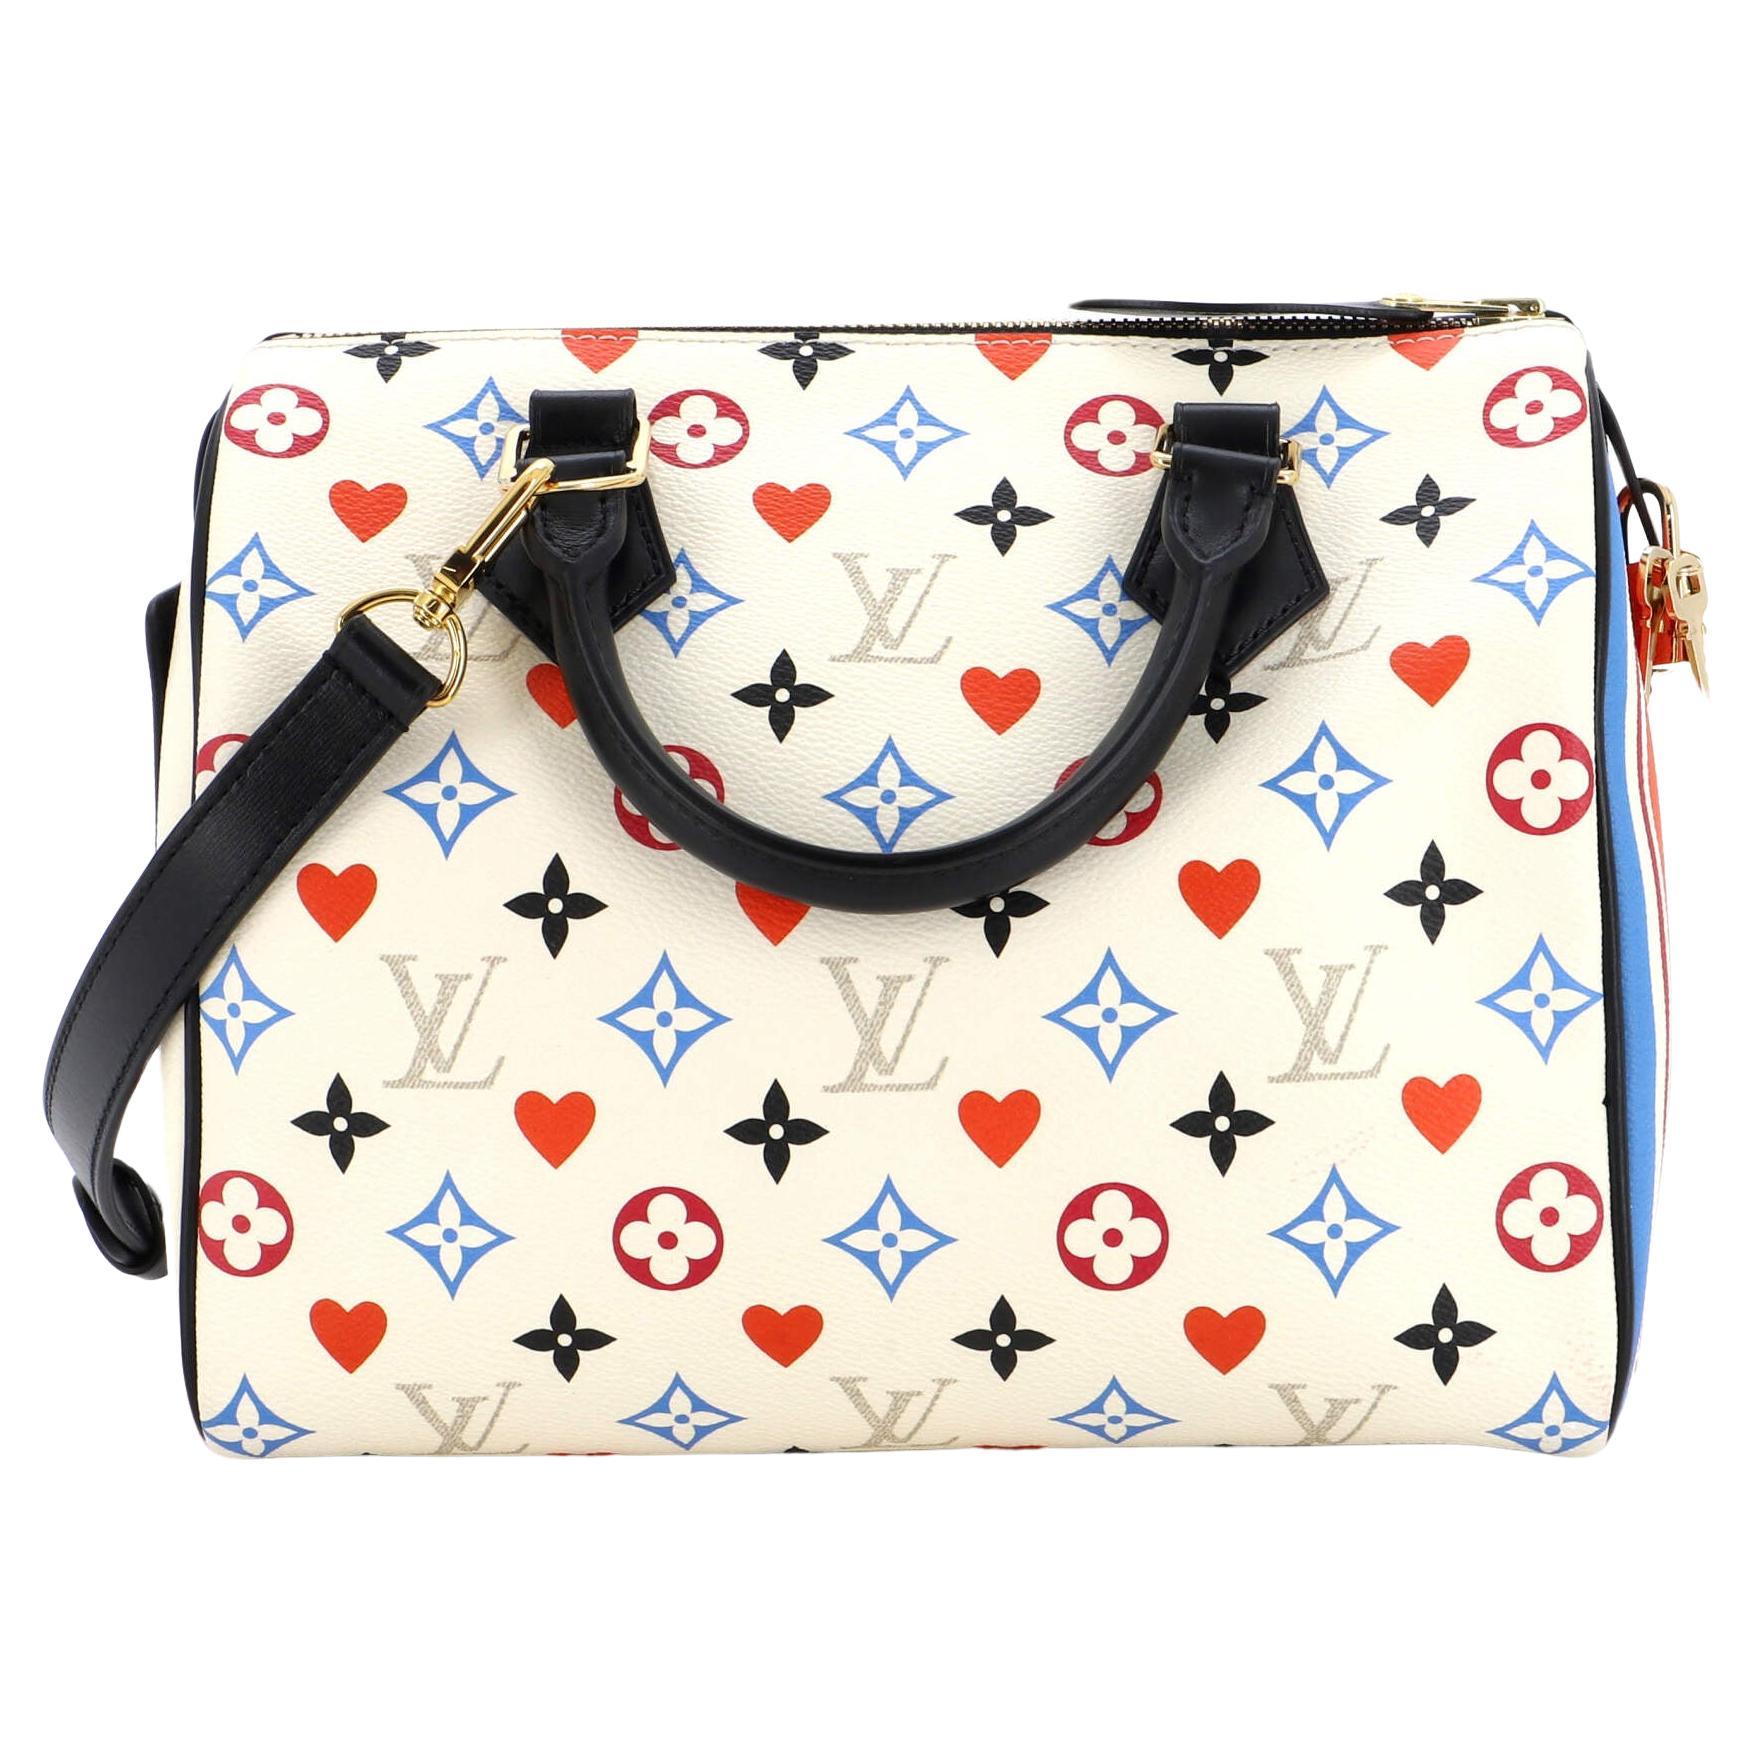 LOUIS VUITTON Limited Edition White Monogram Multicolore Fringe Speedy 25  Bag at 1stDibs